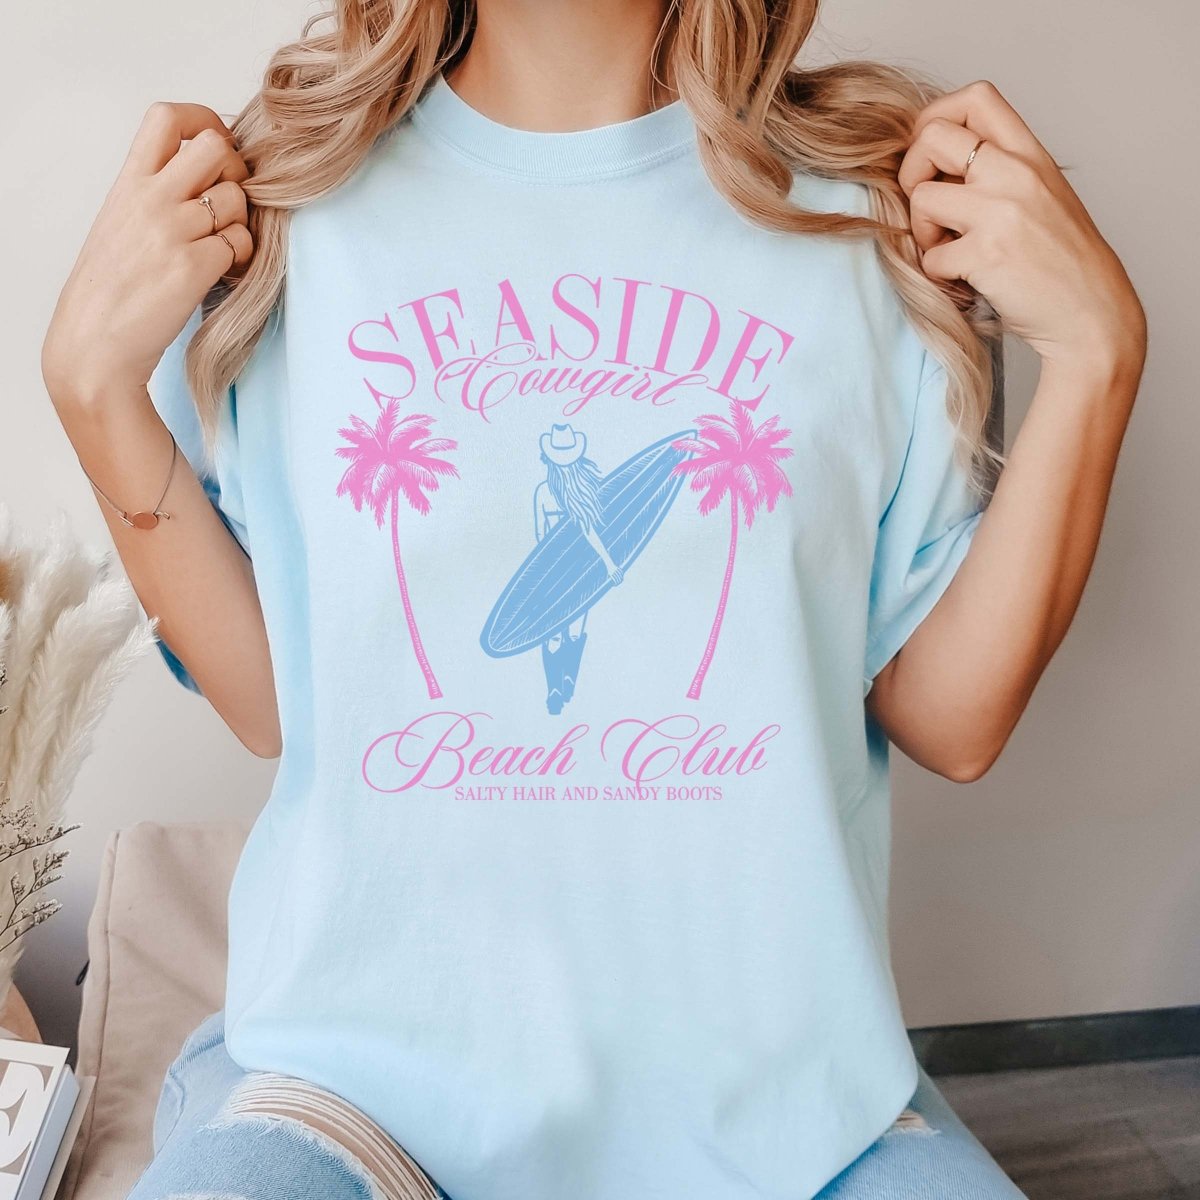 Seaside Cowgirl Comfort Color Tee - Limeberry Designs